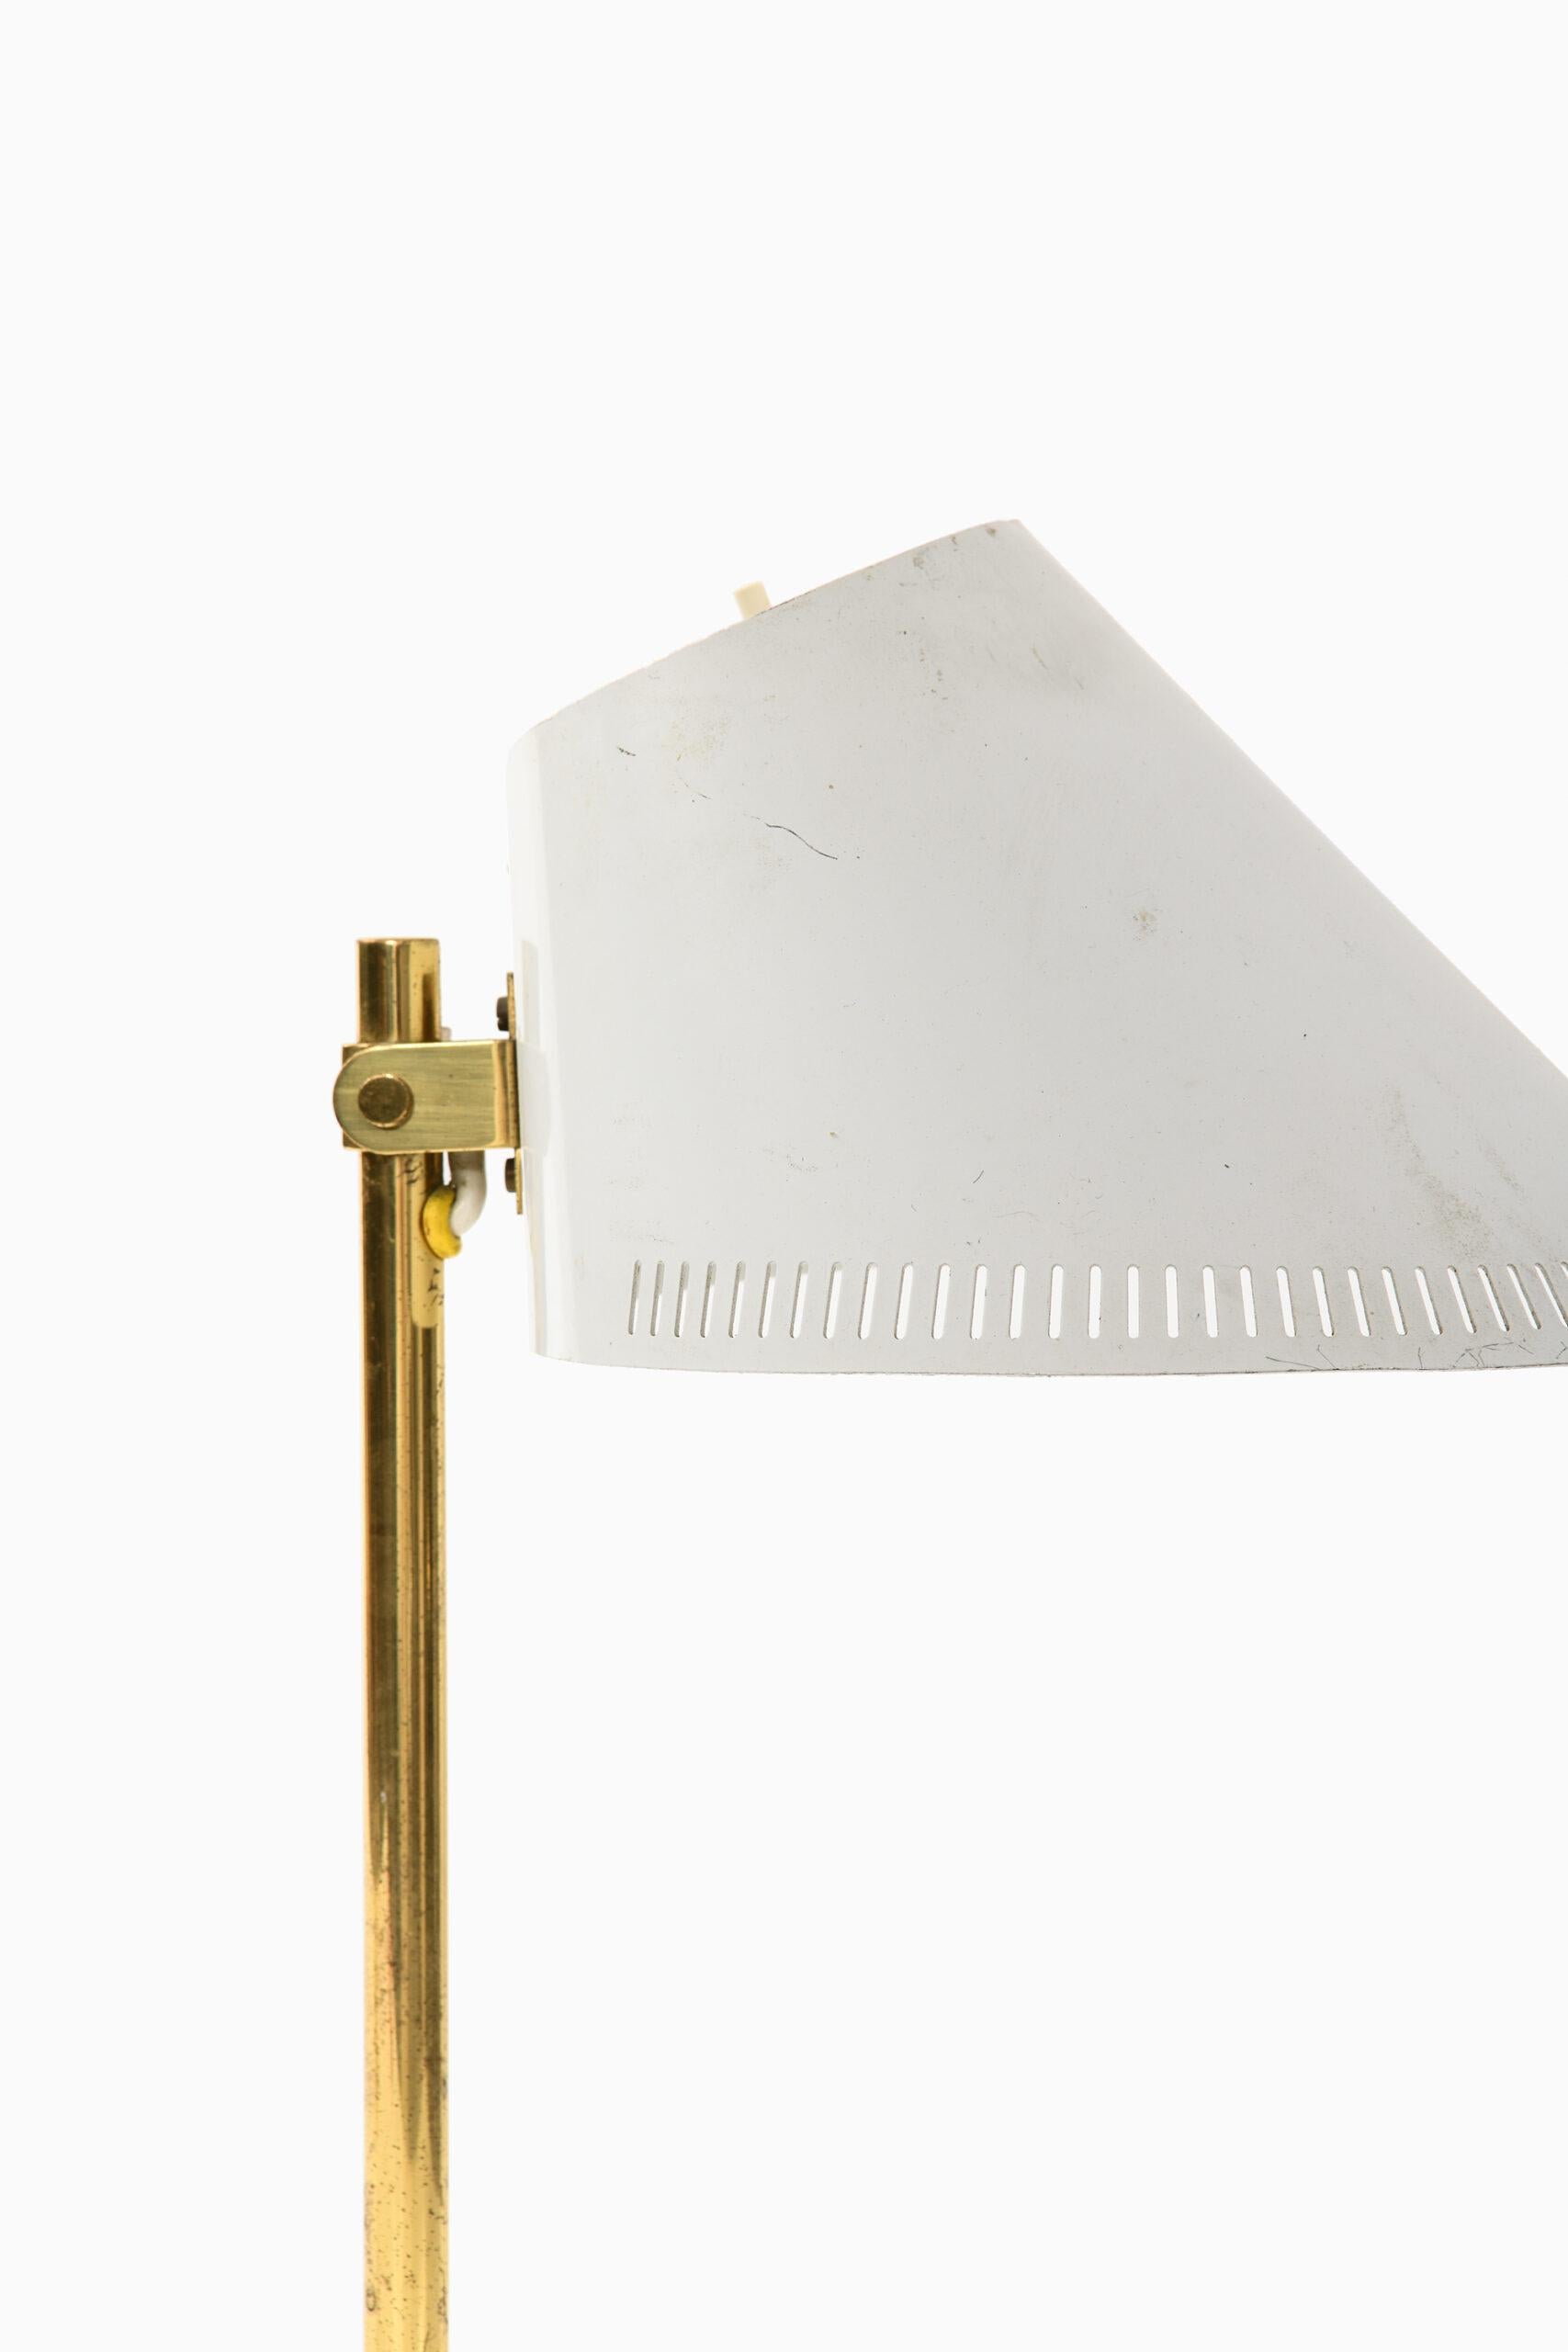 Table lamp model 9227 designed by Paavo Tynell. Produced by Idman in Finland.